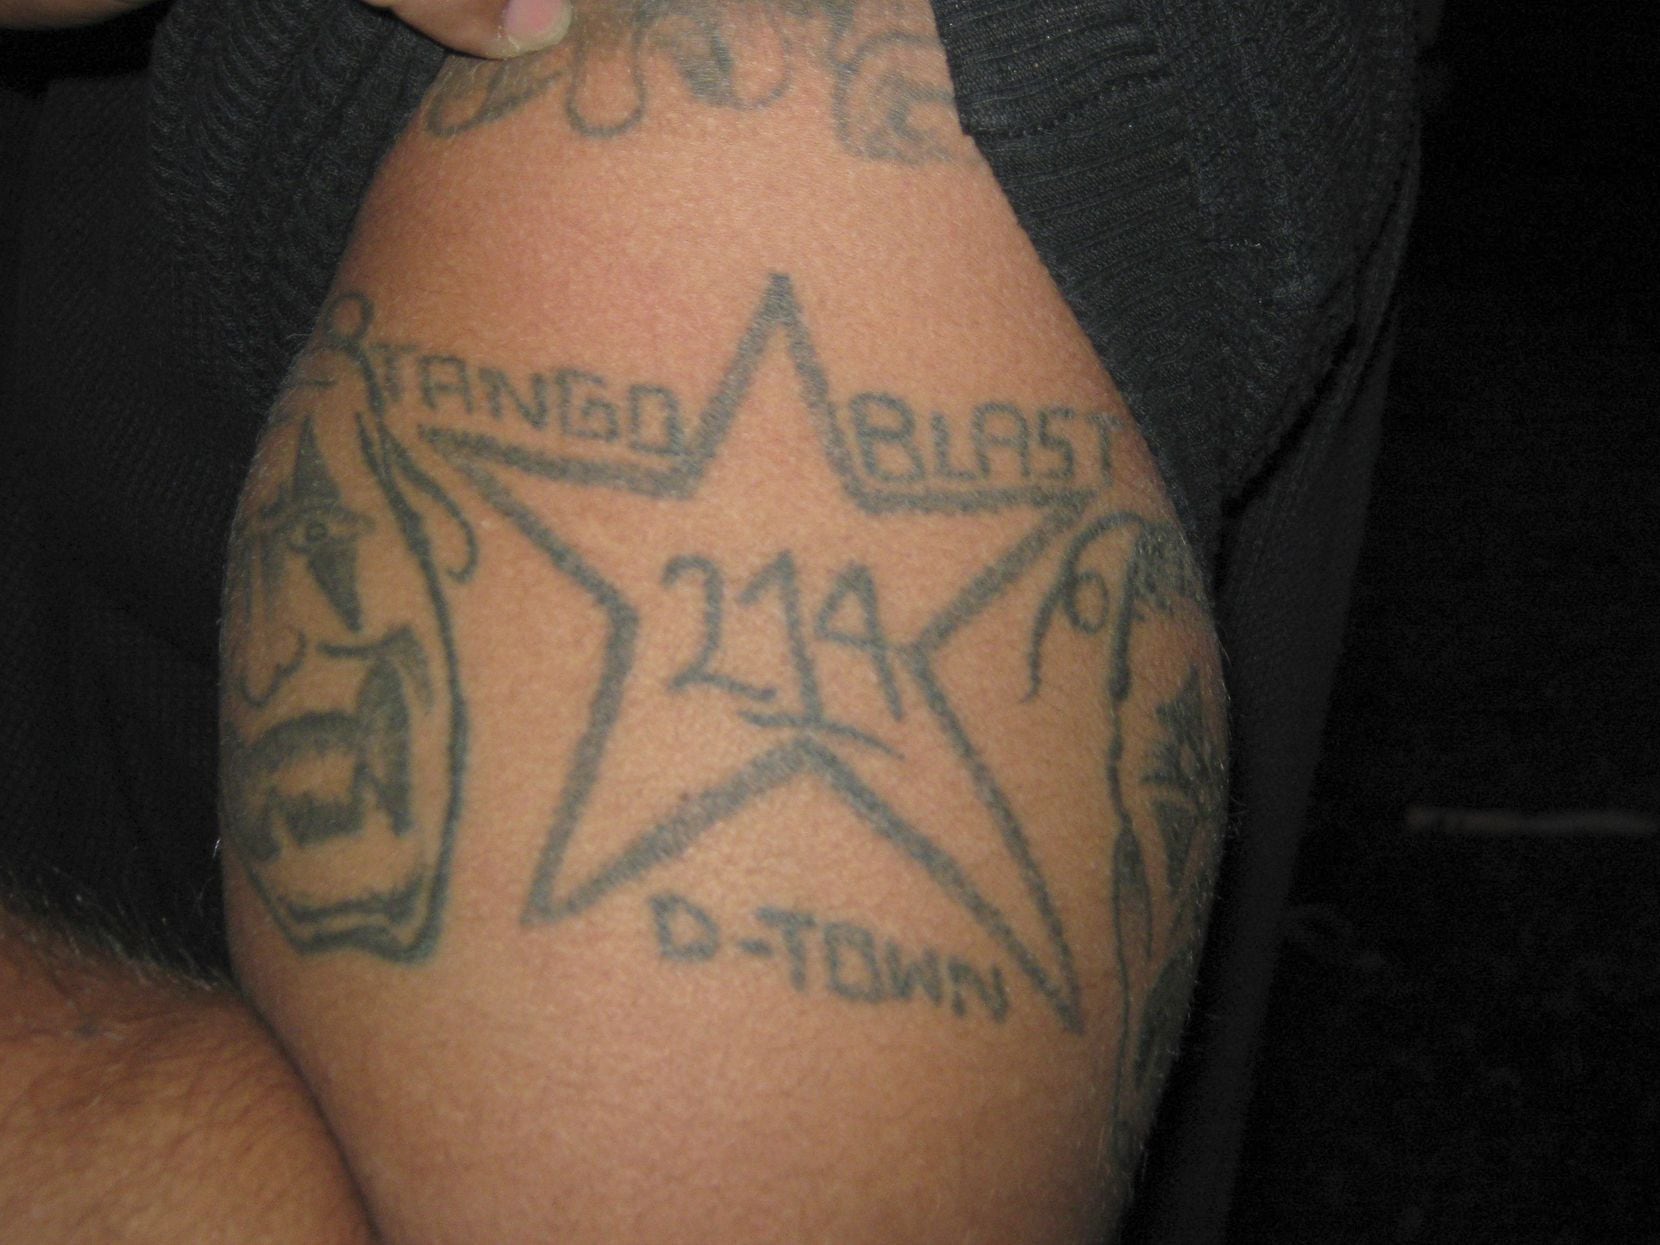 The star is a common tattoo for Tango Blast members, and the "214"...